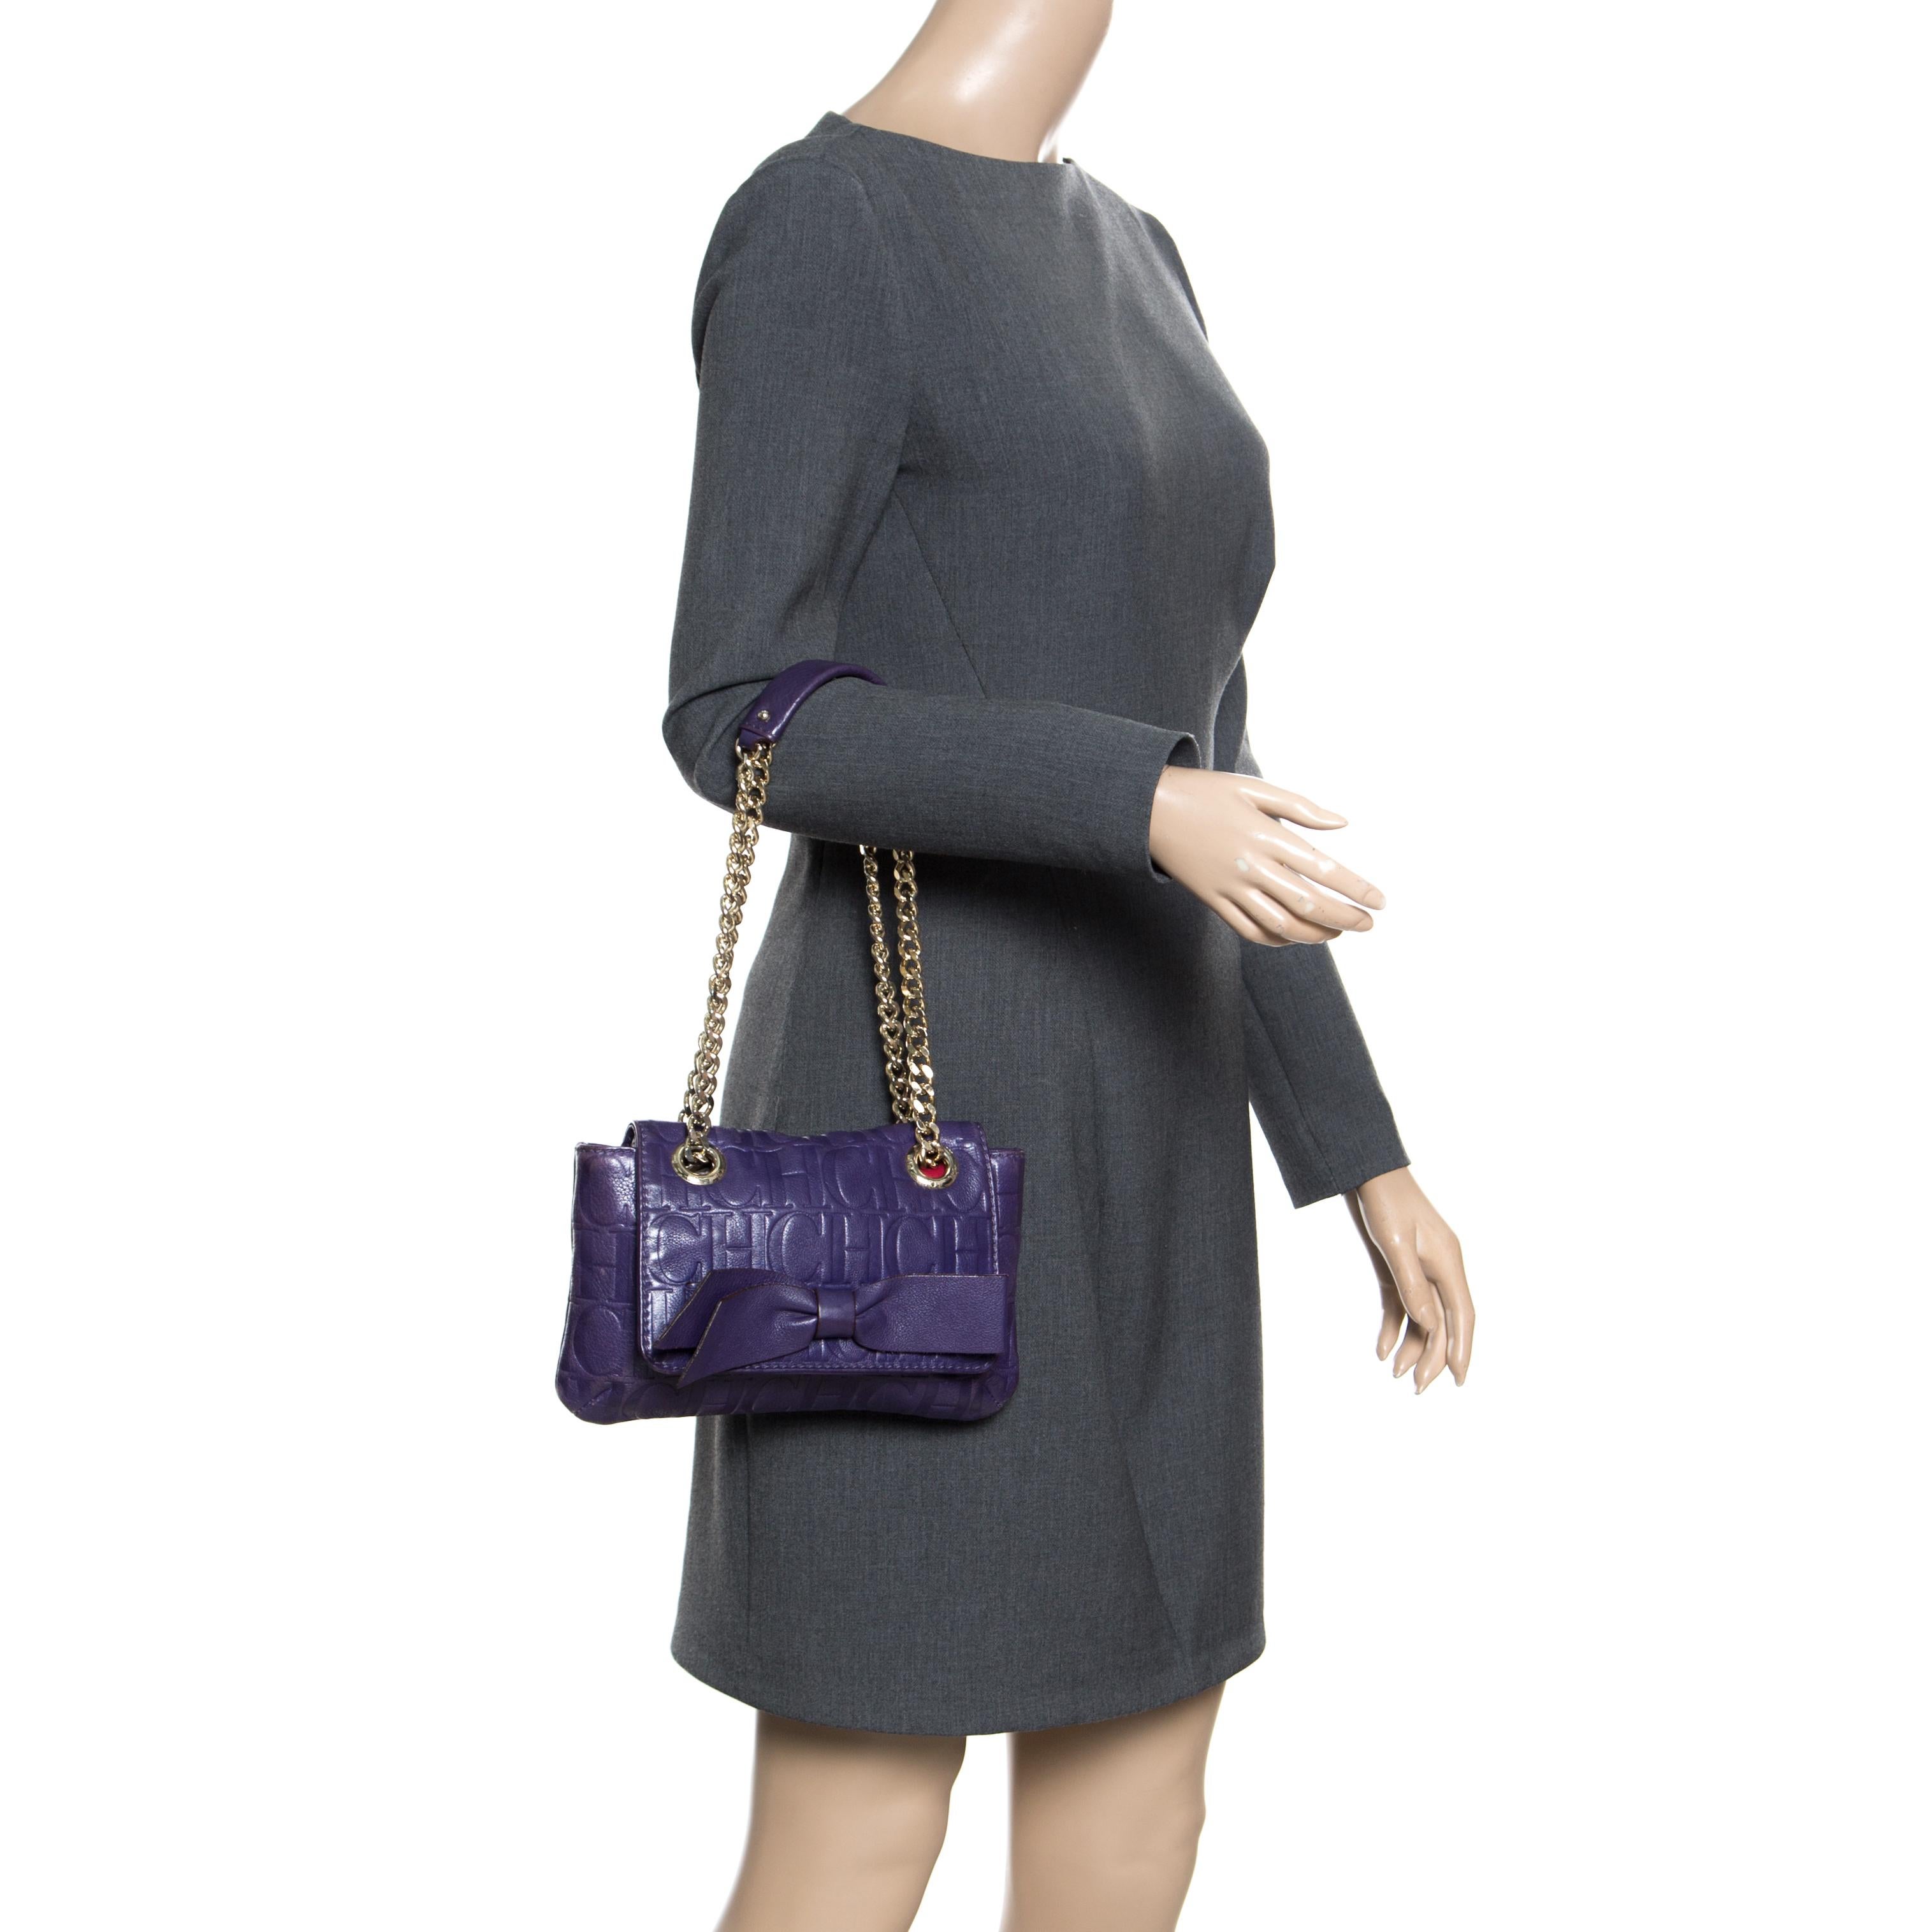 This Audrey bag from Carolina Herrera is styled with a bow detail on the front. It is crafted with signature monogram leather in a pretty purple color and a flap top that leads to a fabric-lined interior with a side zip pocket. The bag also features